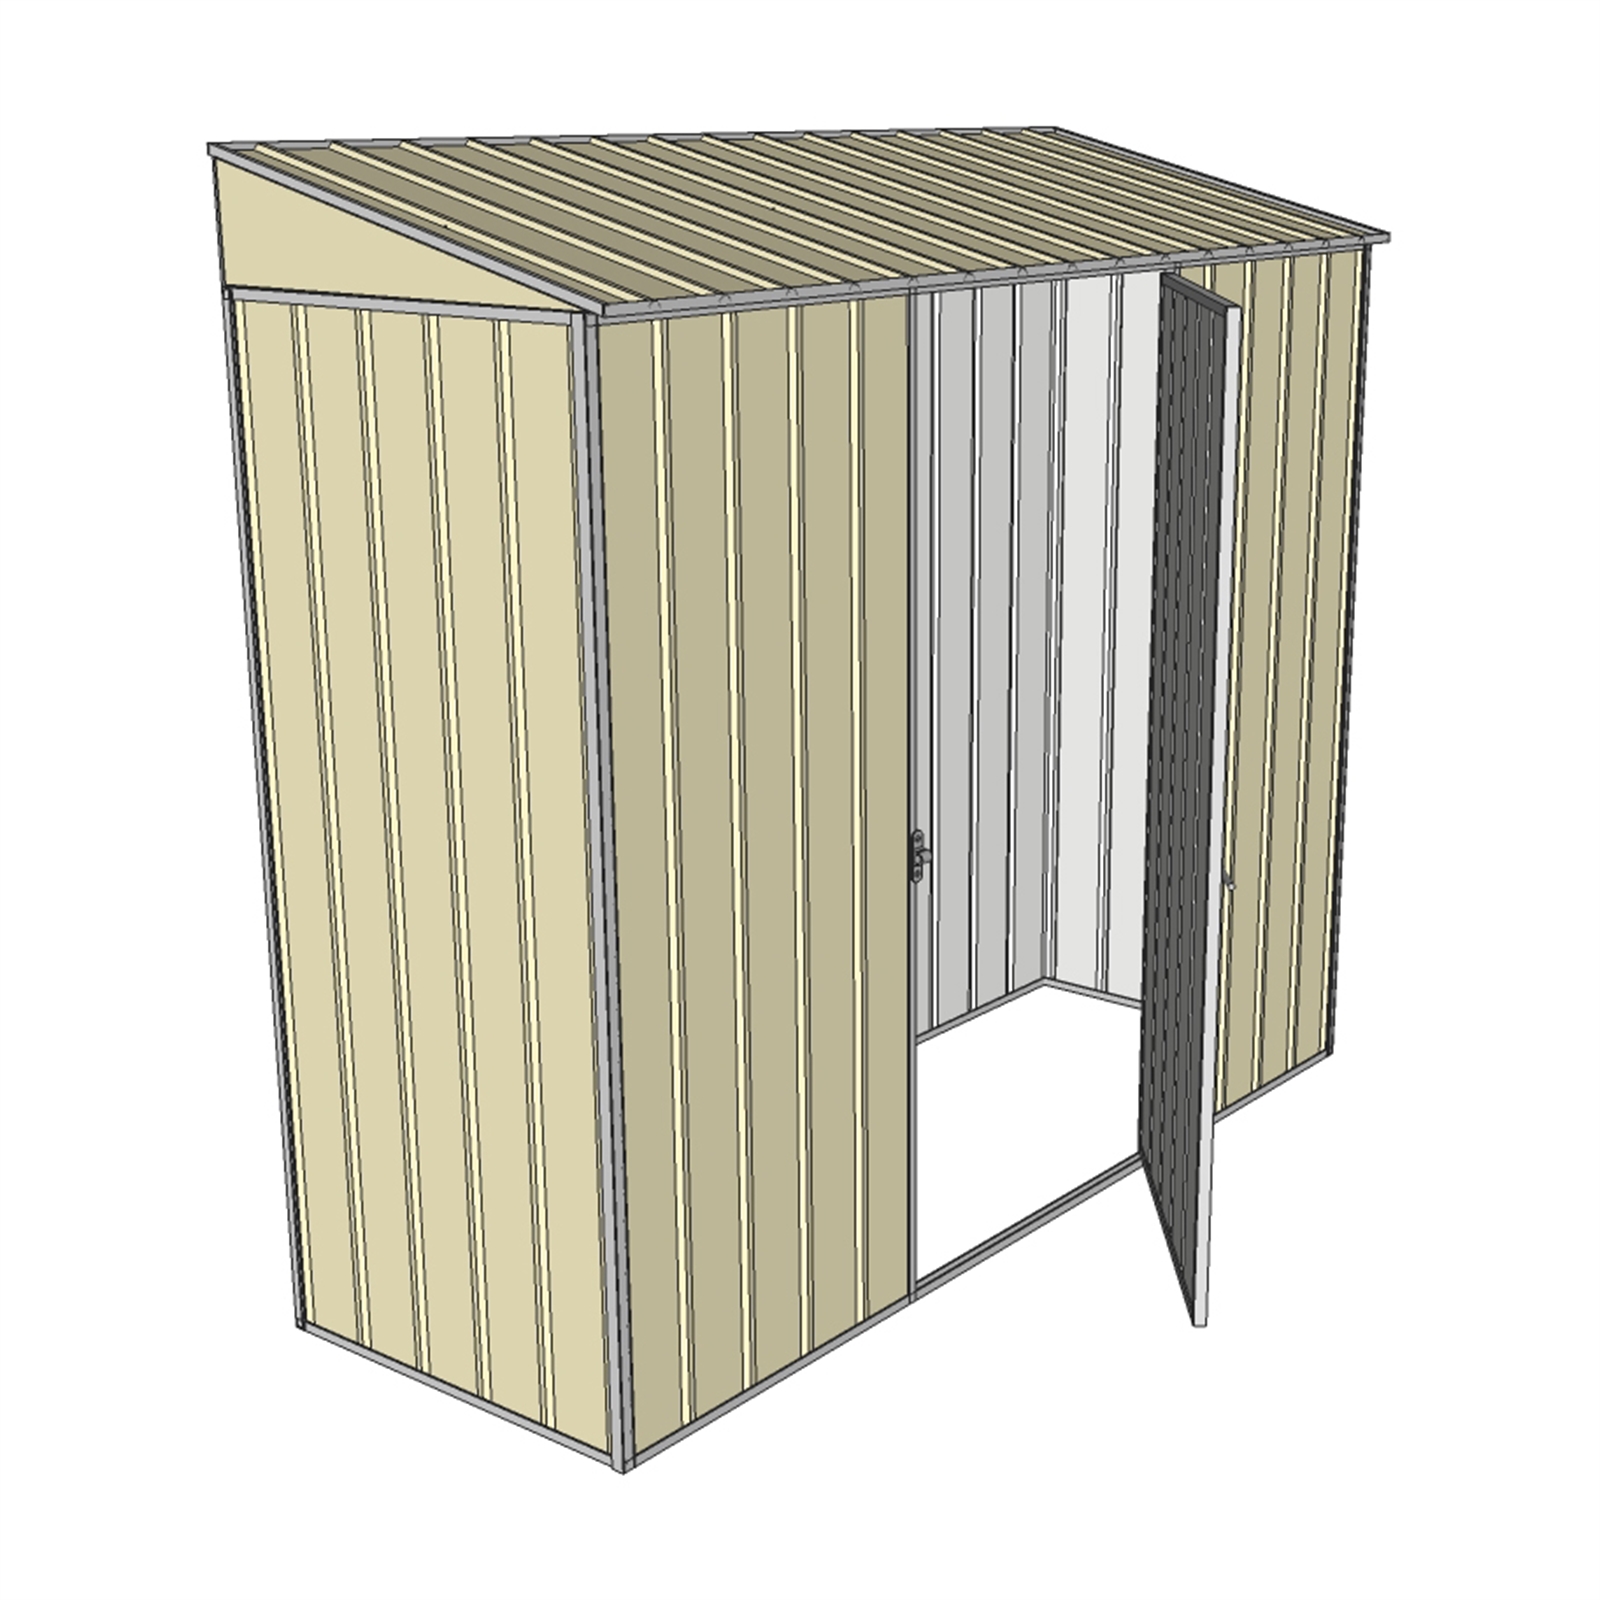 Build-a-Shed 2.3 x 2.0 x 0.8m Cream Skillion Single Hinged Door Narrow Shed